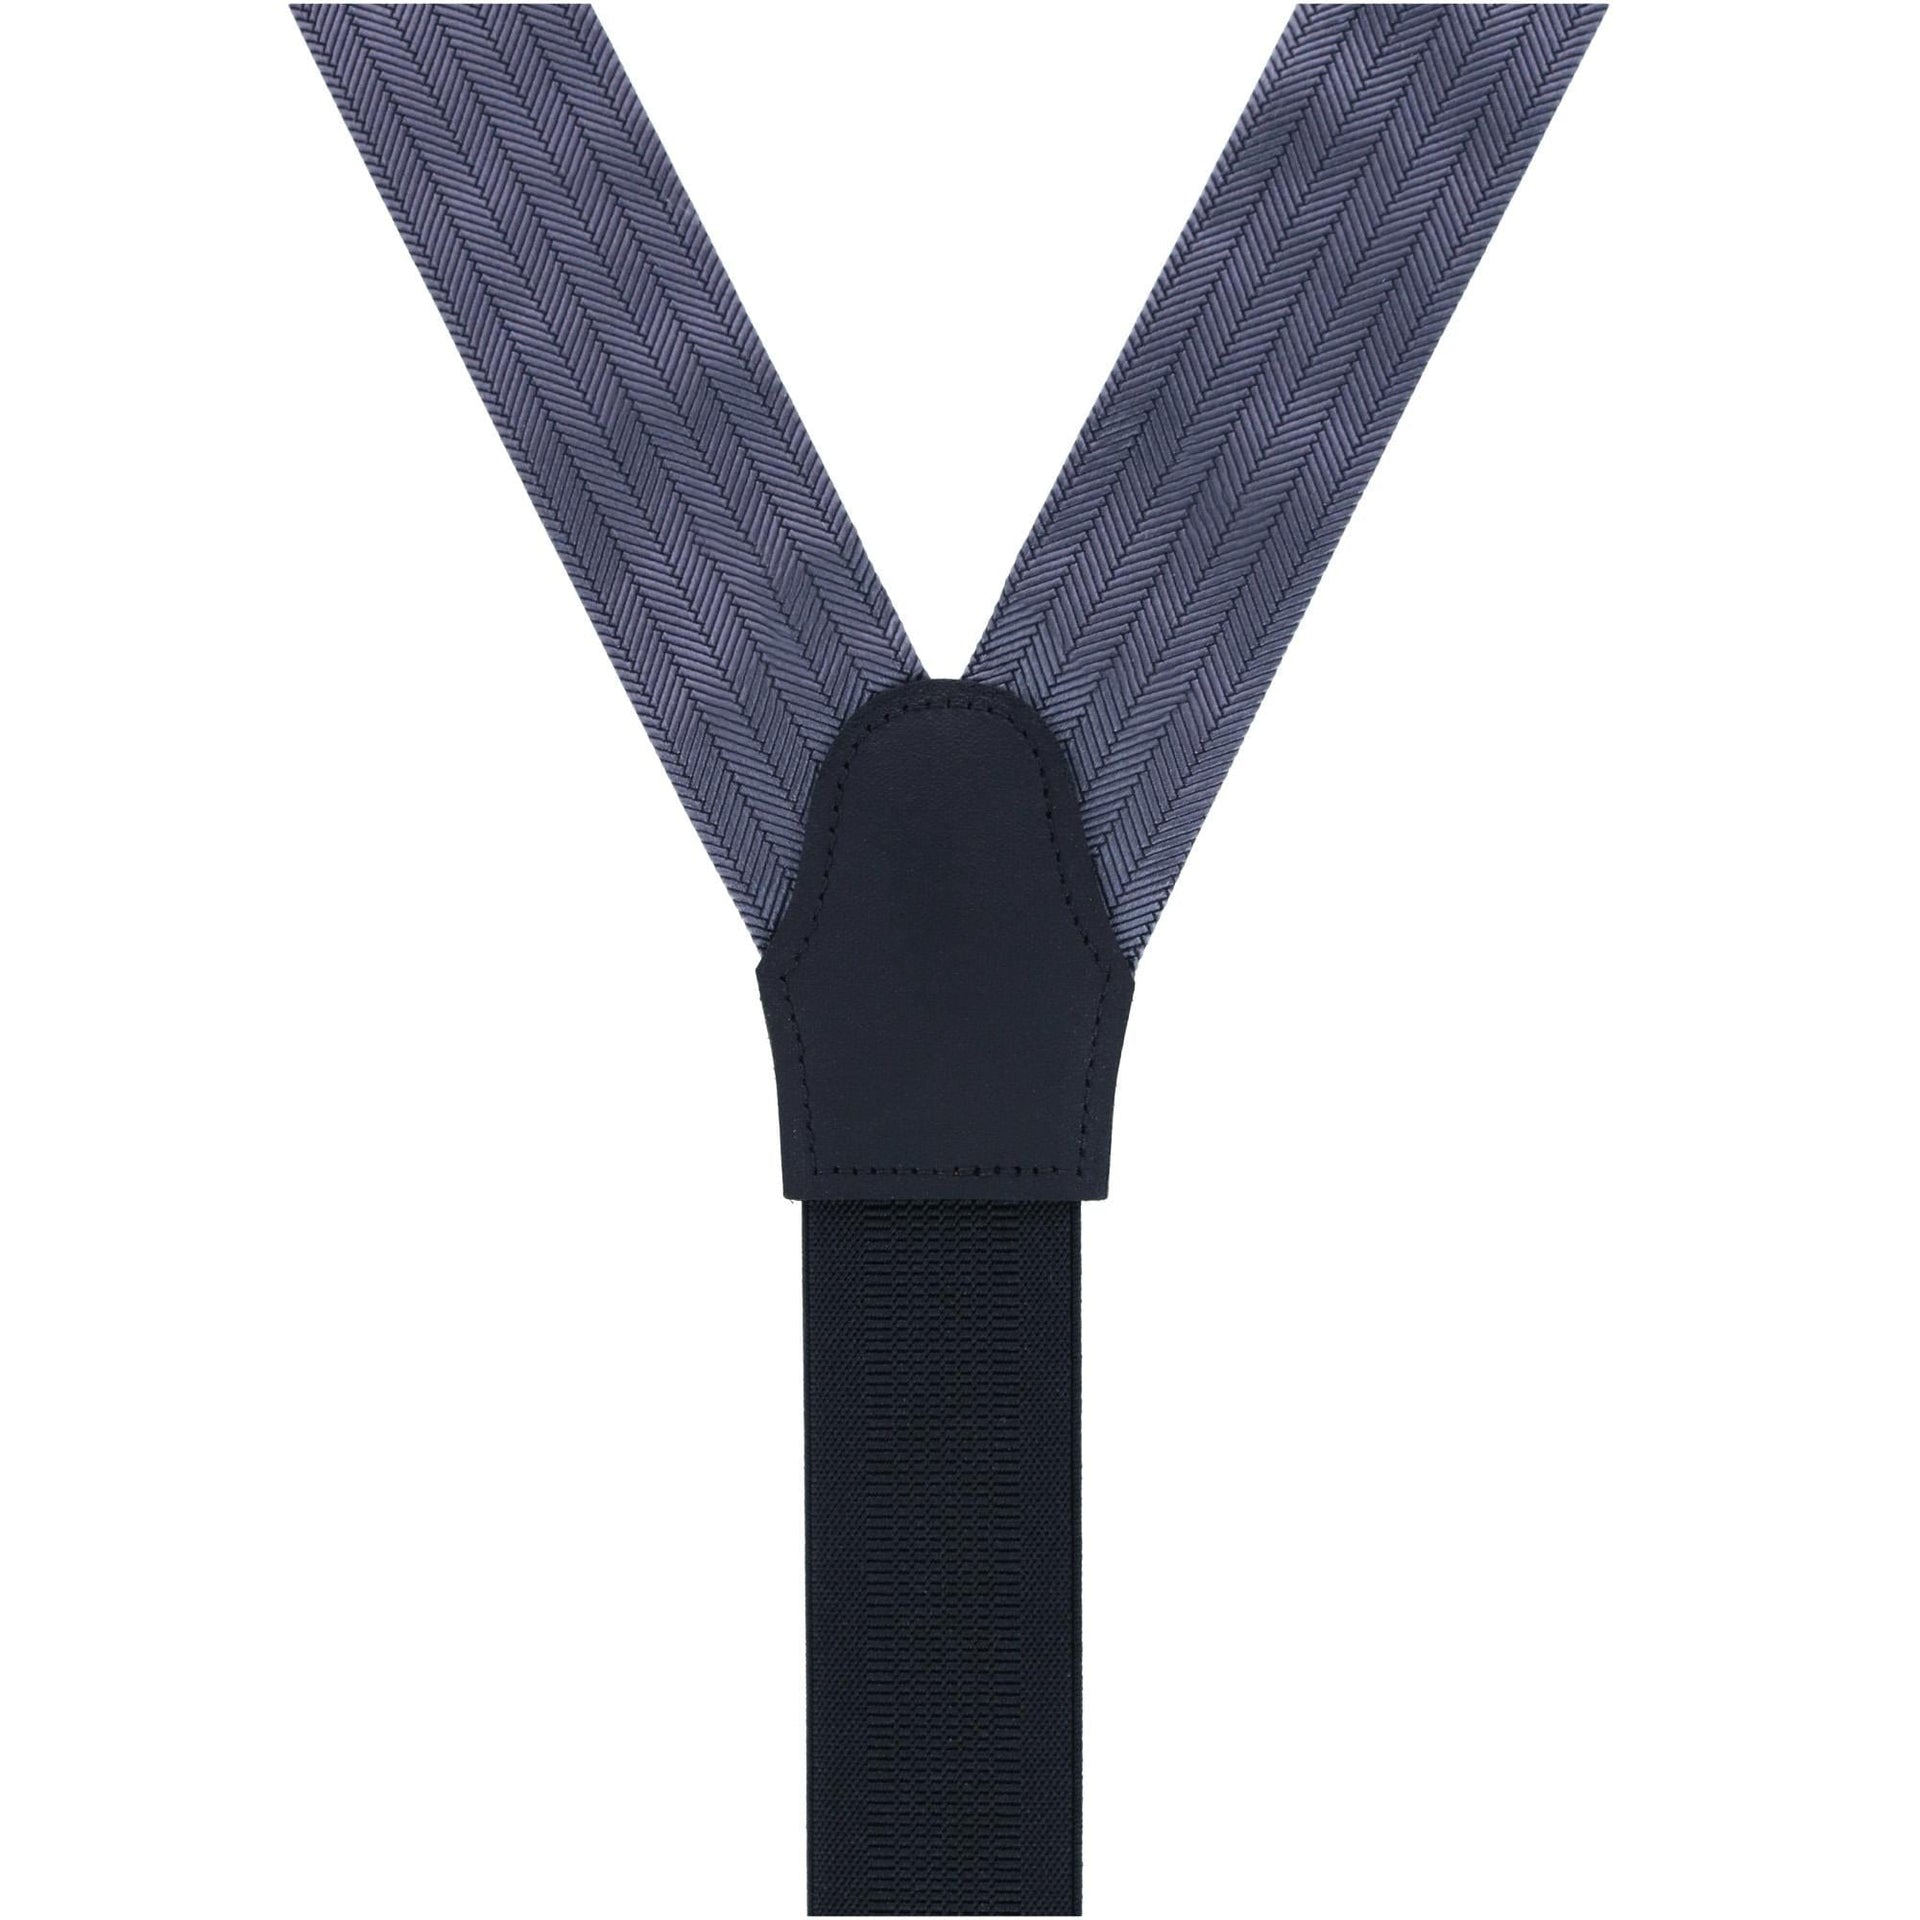 HOLD'EM 100% Silk Suspenders For Men Y-Back Button End Made in USA – Many  Colors and Designs